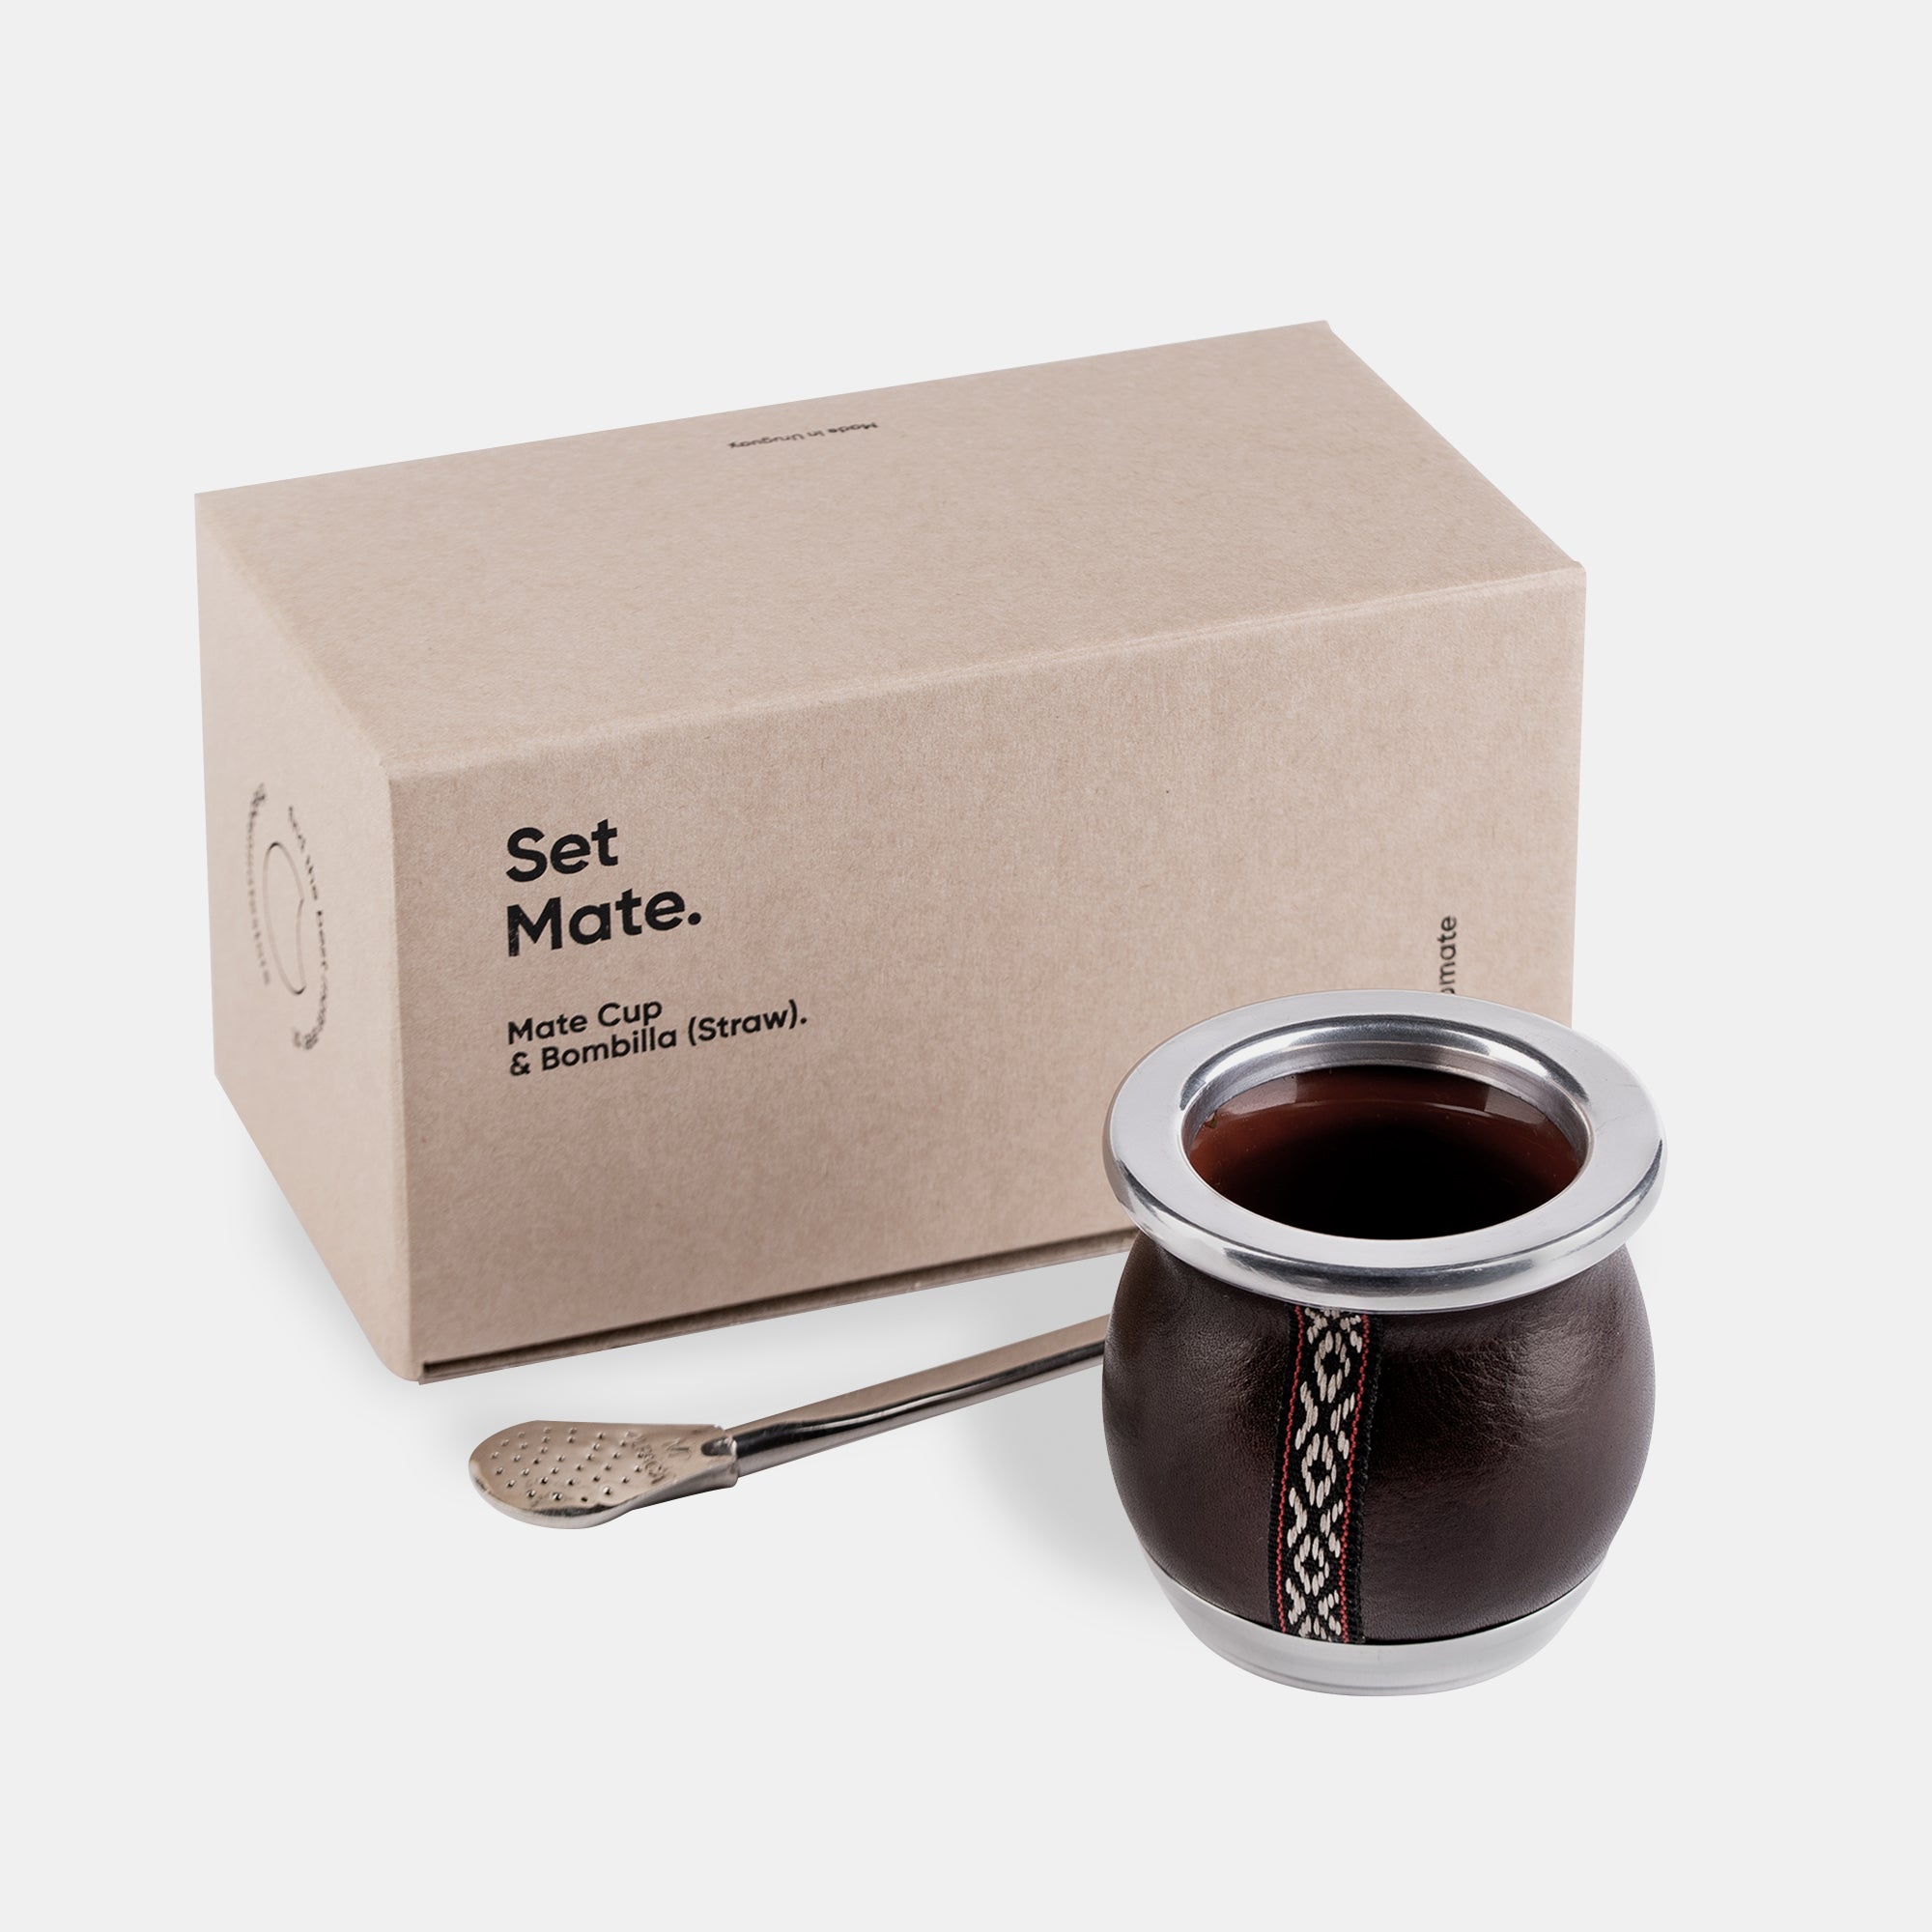 Ceramic Mate Cup Bound in Leather to Drink Yerba Mate UruShop